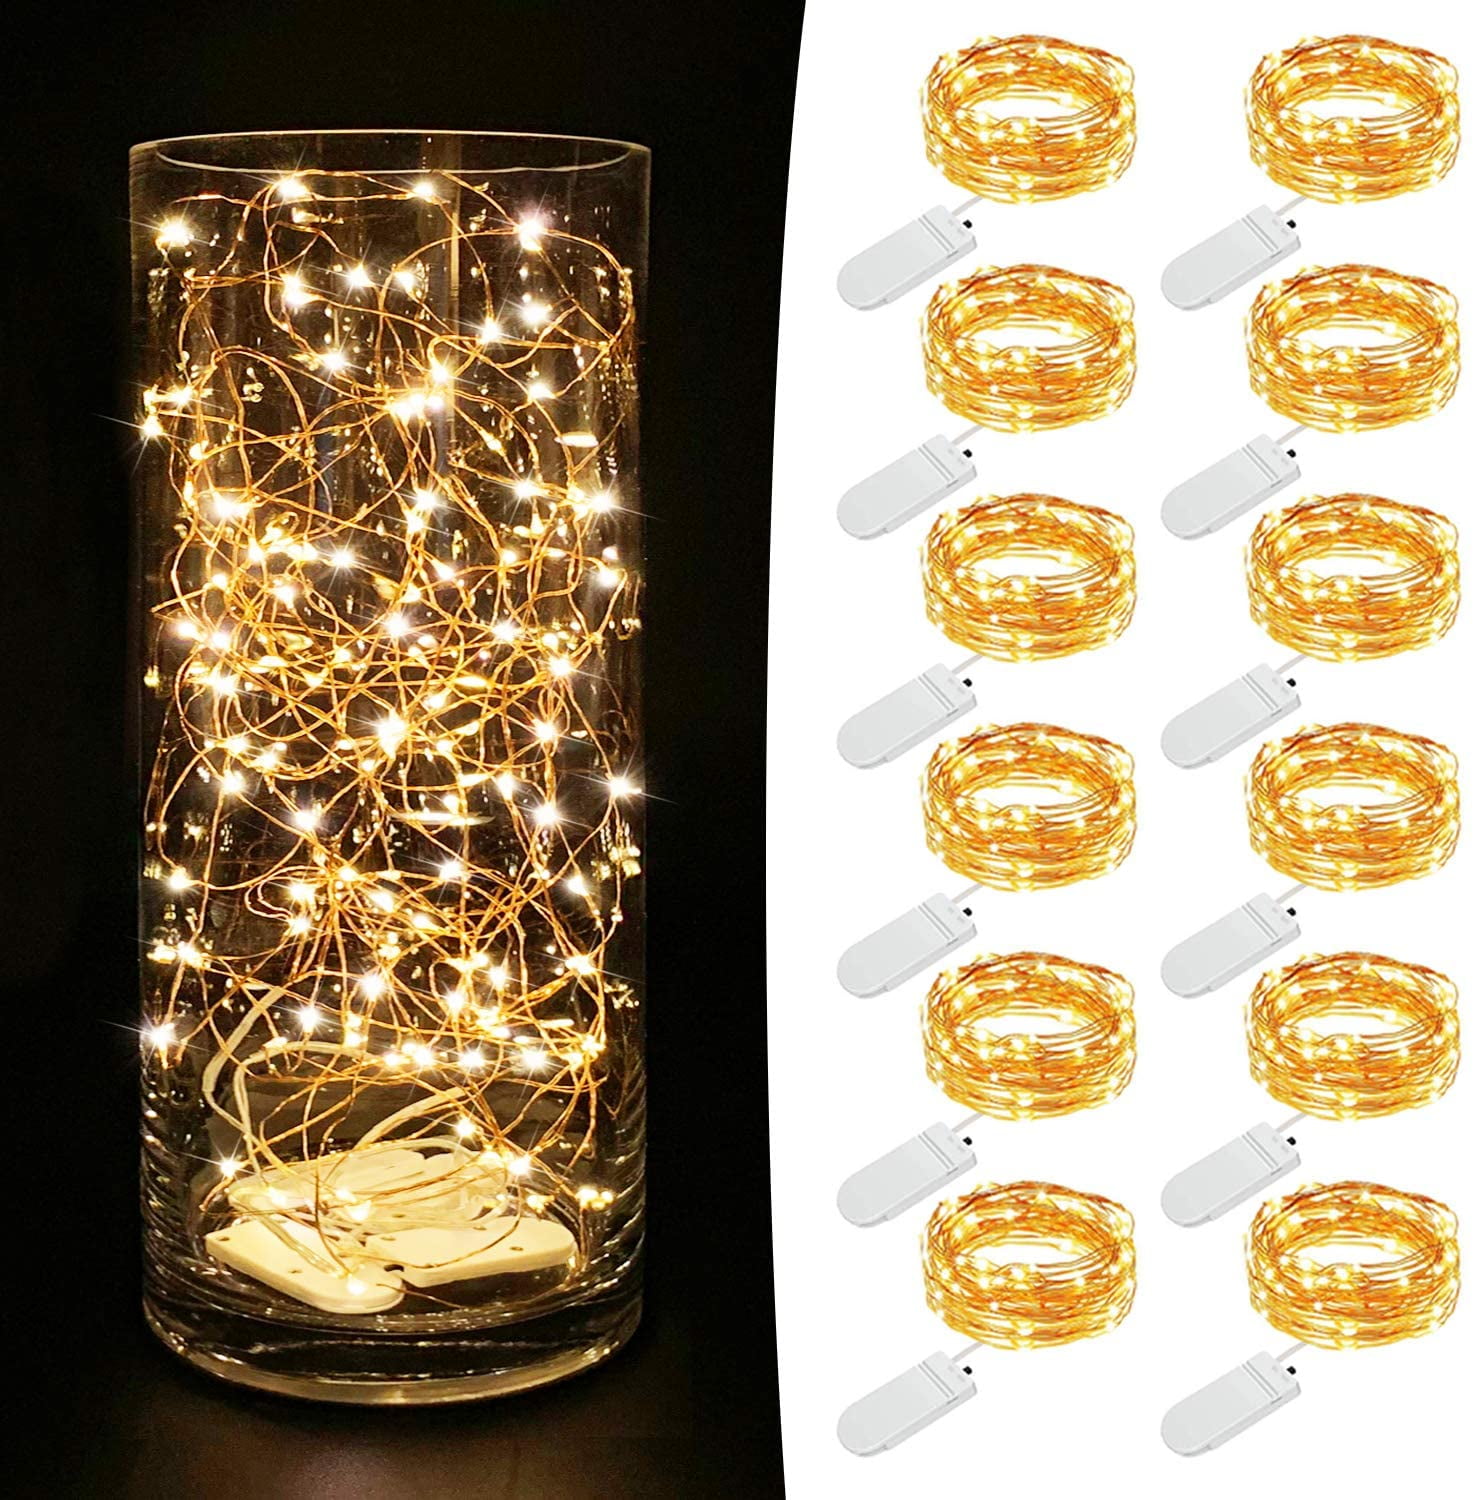 8Pcs Waterproof 20 LED MICRO Starry Rope Copper Wire String Fairy Lights Decor 